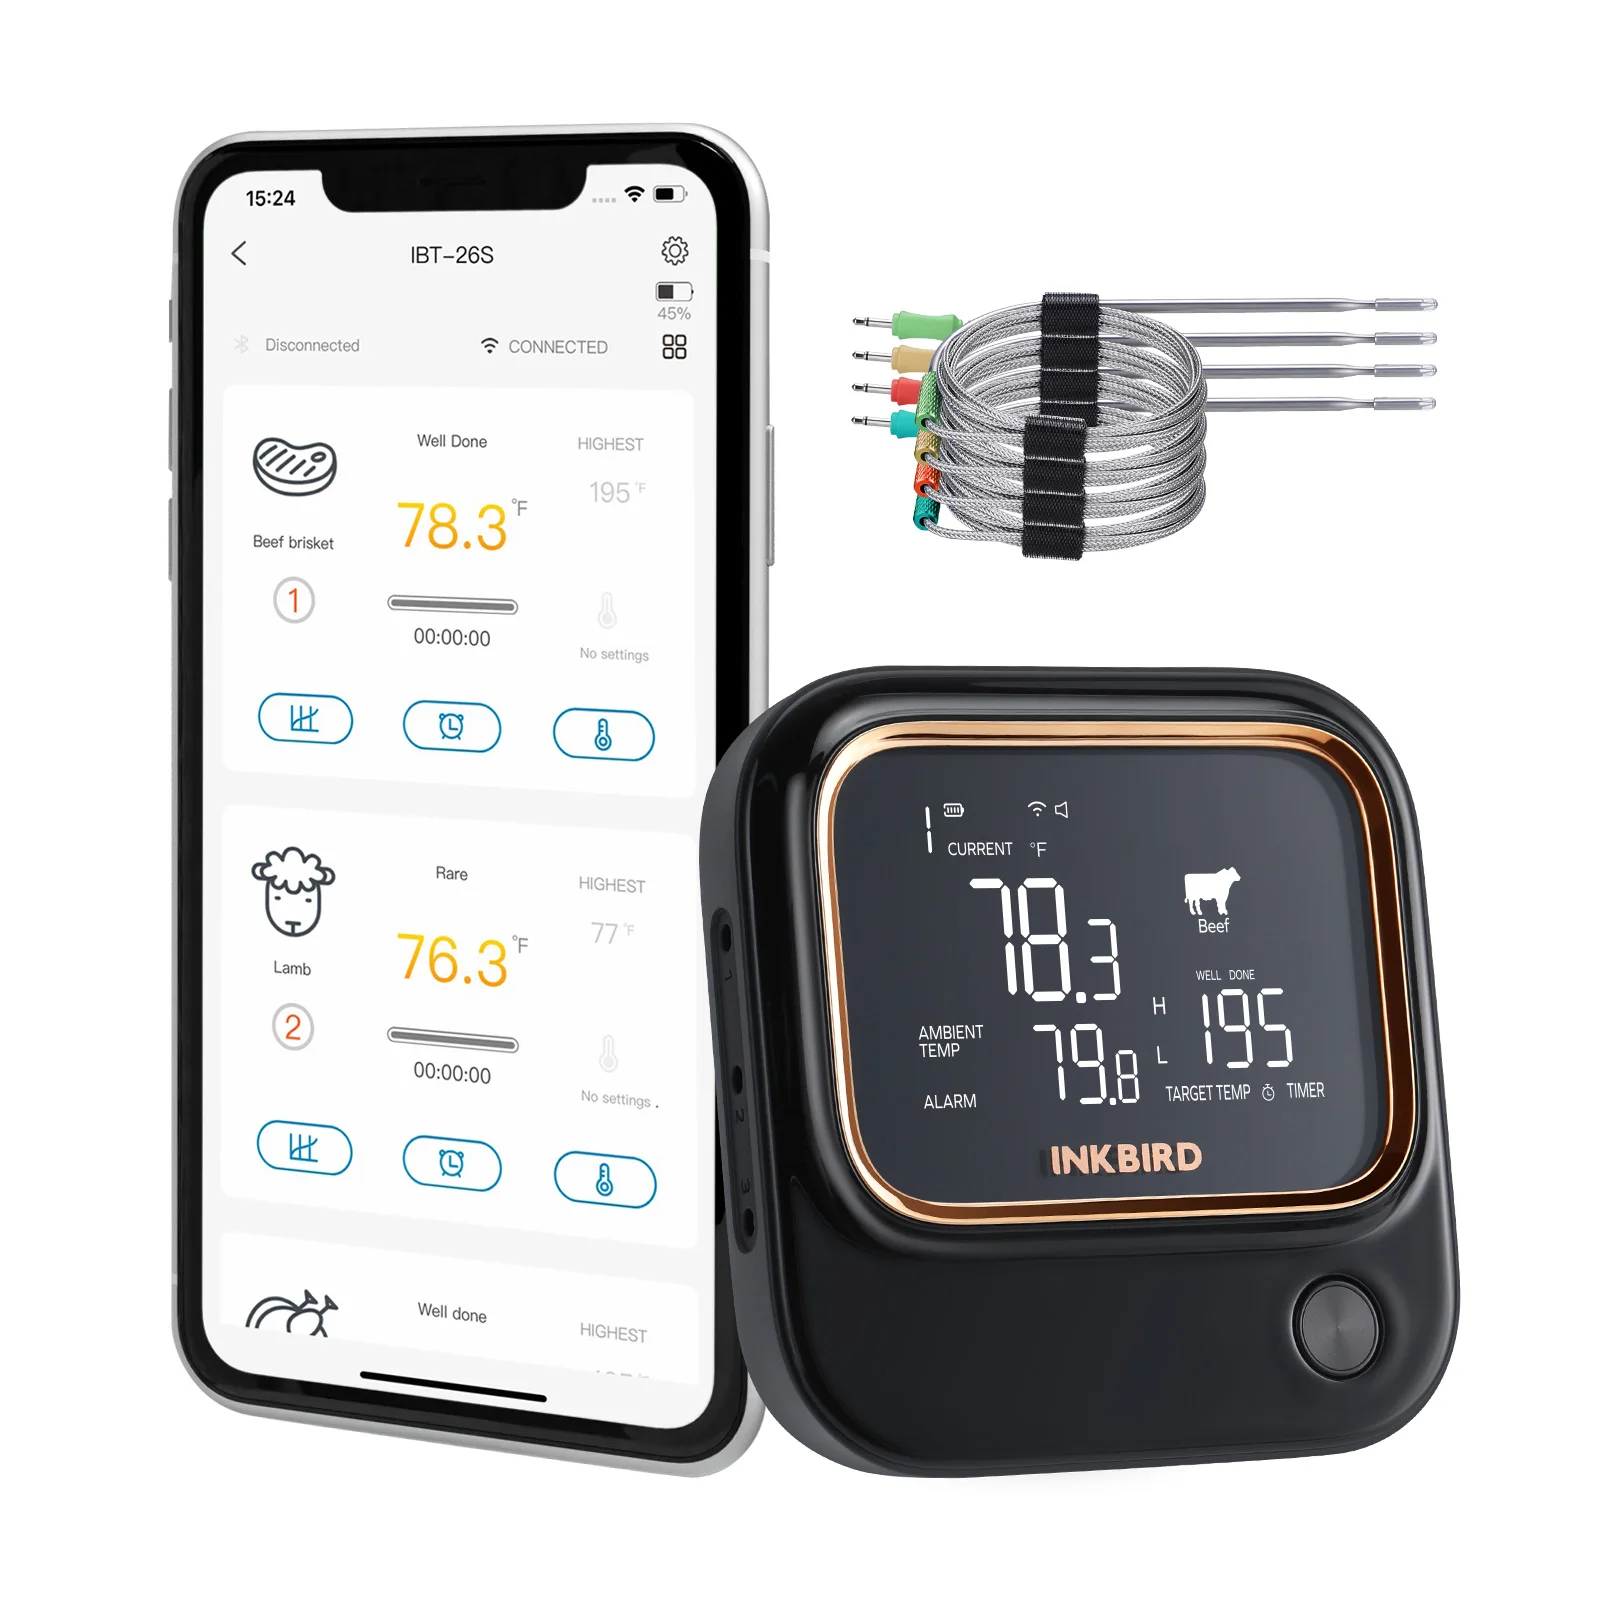 

INKBIRD BBQ with 4/6 Food-grade Probes Thermometer IBT-26S Bluetooth Wi-Fi APP Control USDA Meat Presets Alarm Timer Backlit LCD